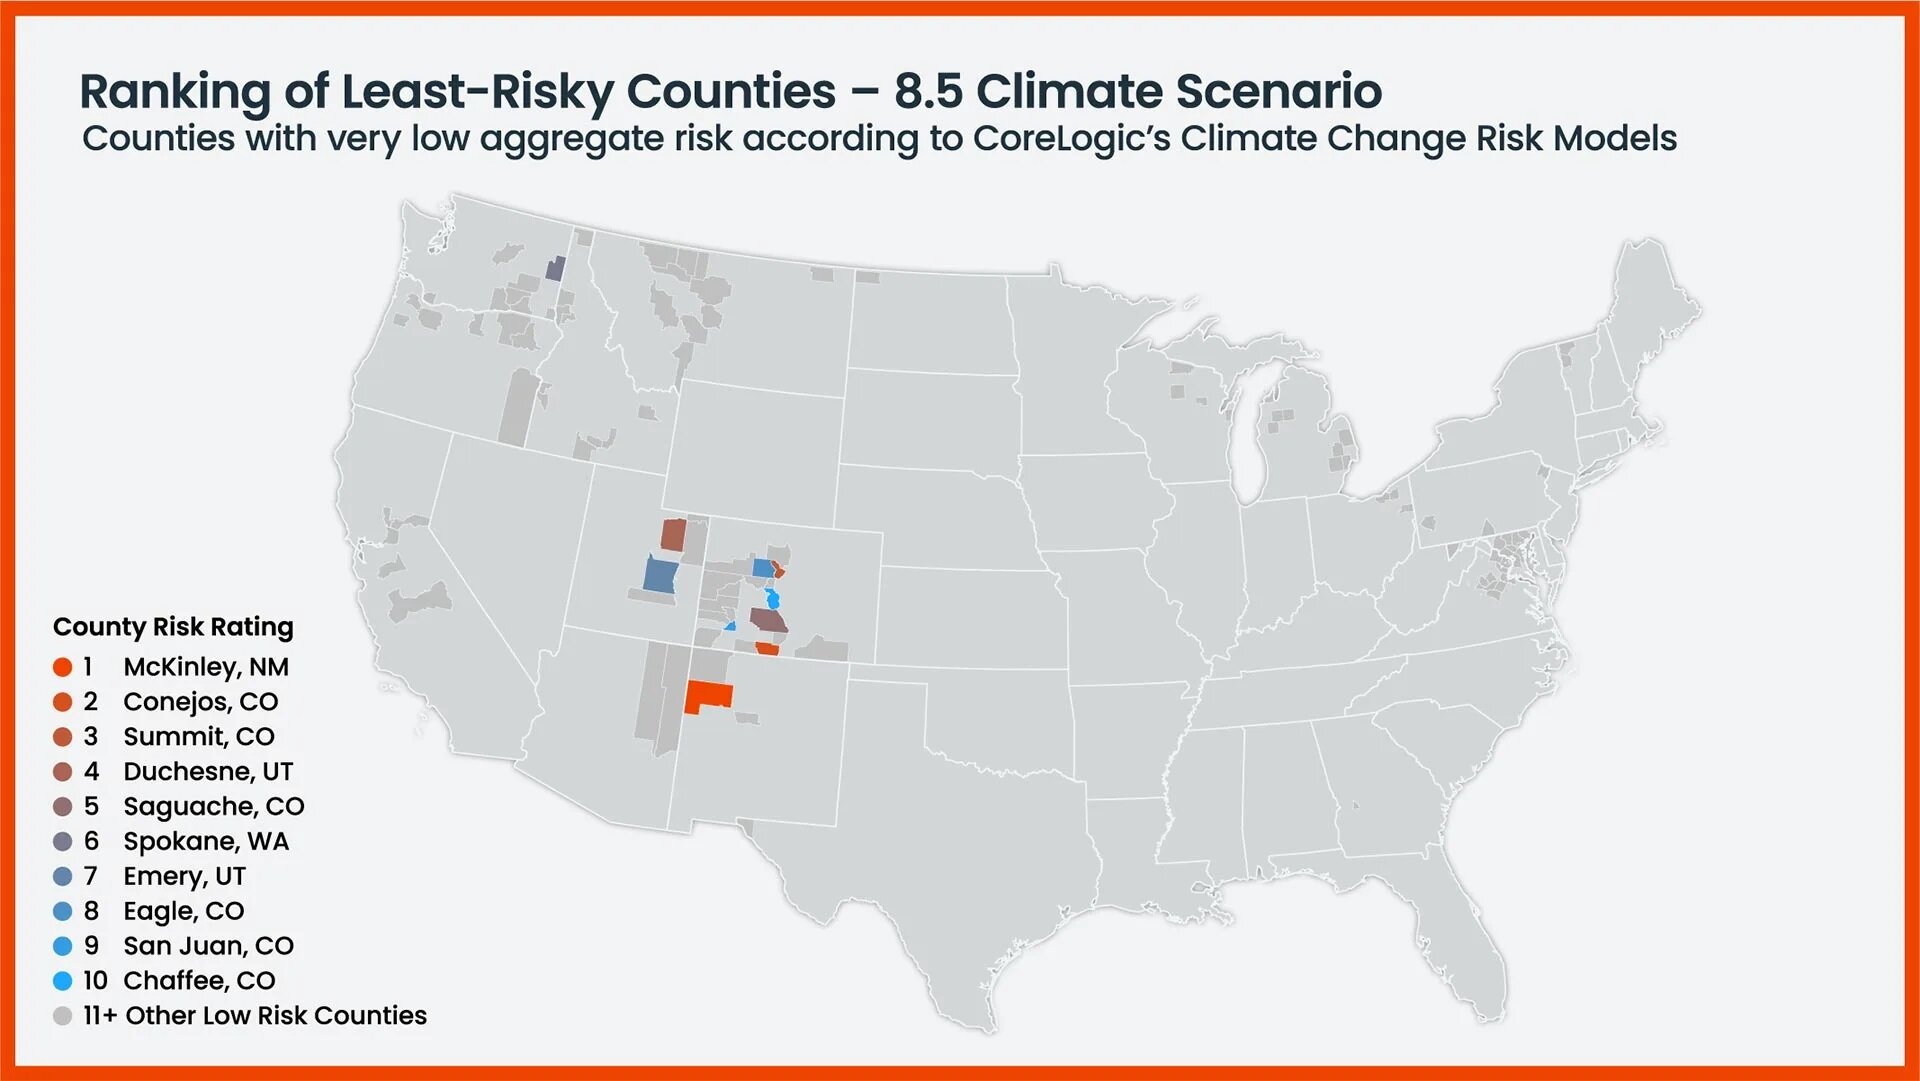 https://www.worldpropertyjournal.com/news-assets-2/Fig-2-MAP-ranking-of-least-risk-counties_8.5-climate-scenario.jpg